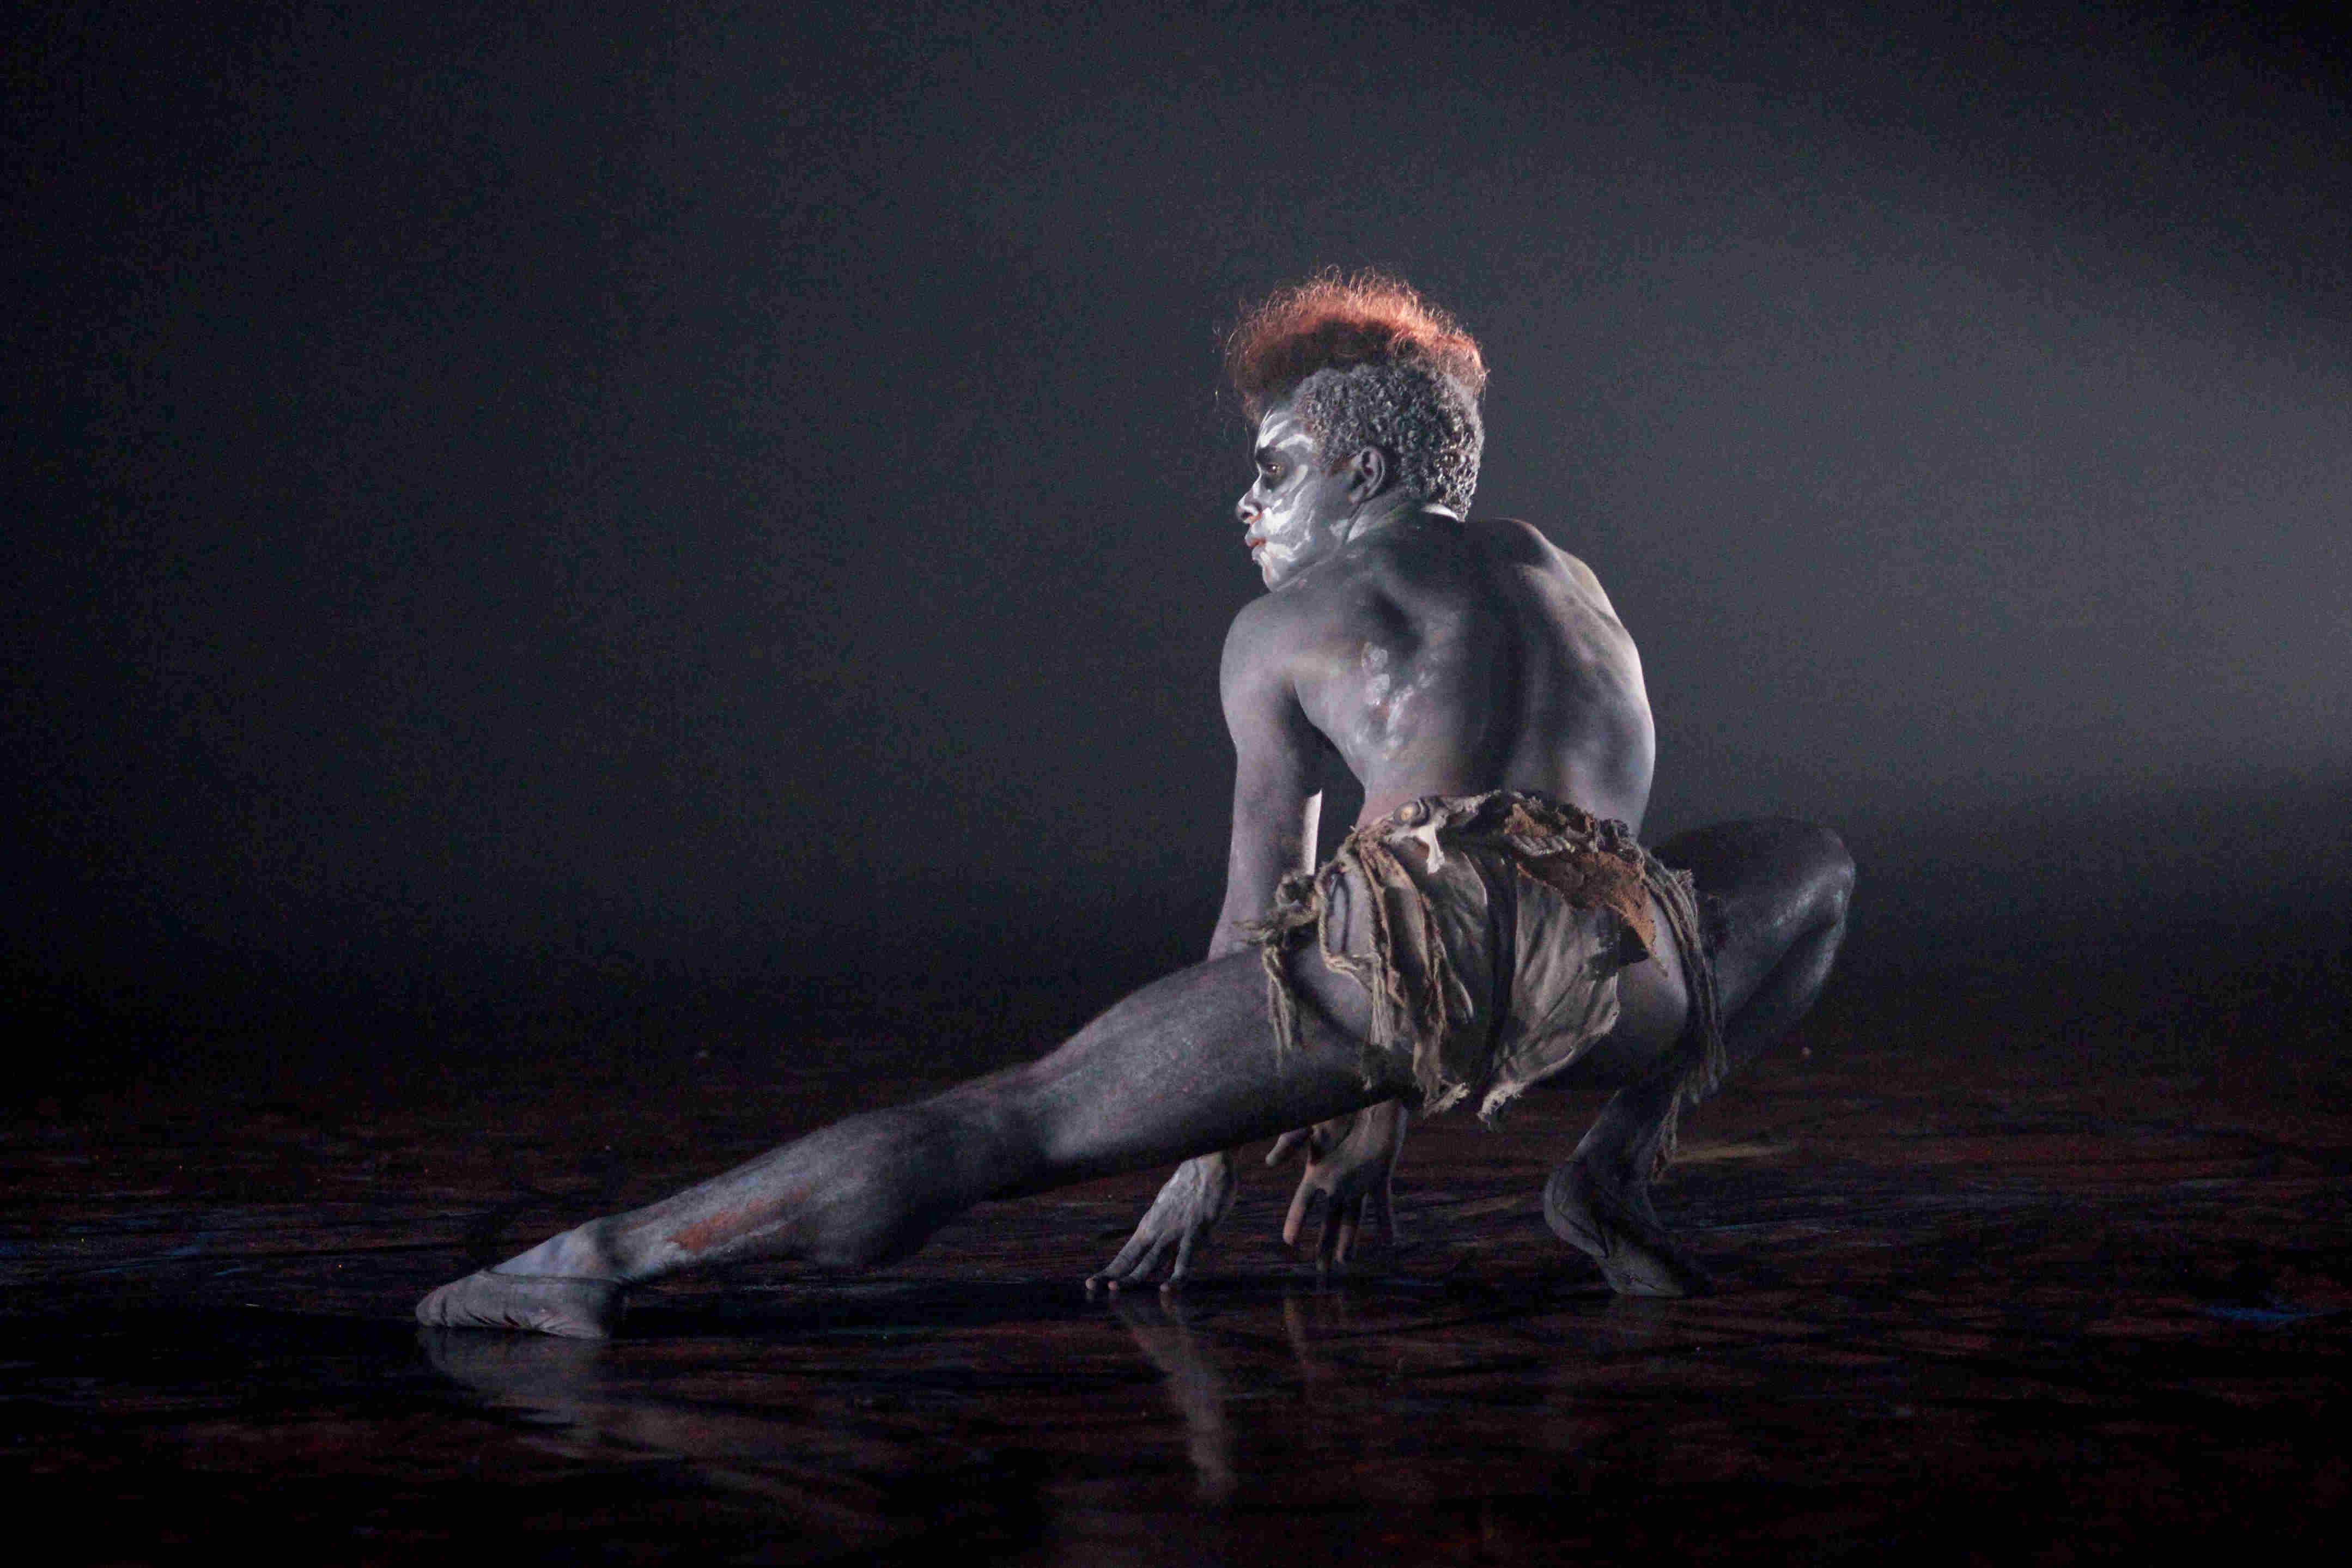 Marcelino Sambé in Aakash Odedra's 'Unearthed'